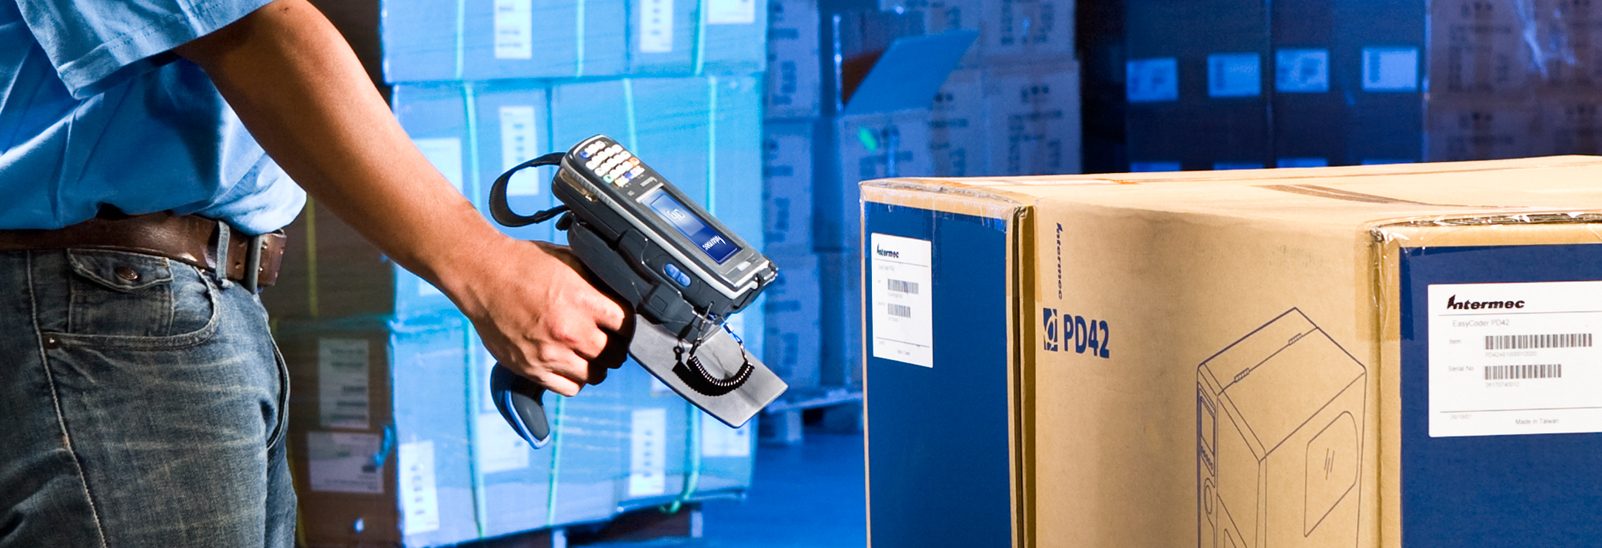 Benefits of Choosing The Correct Warehouse Management System (WMS)